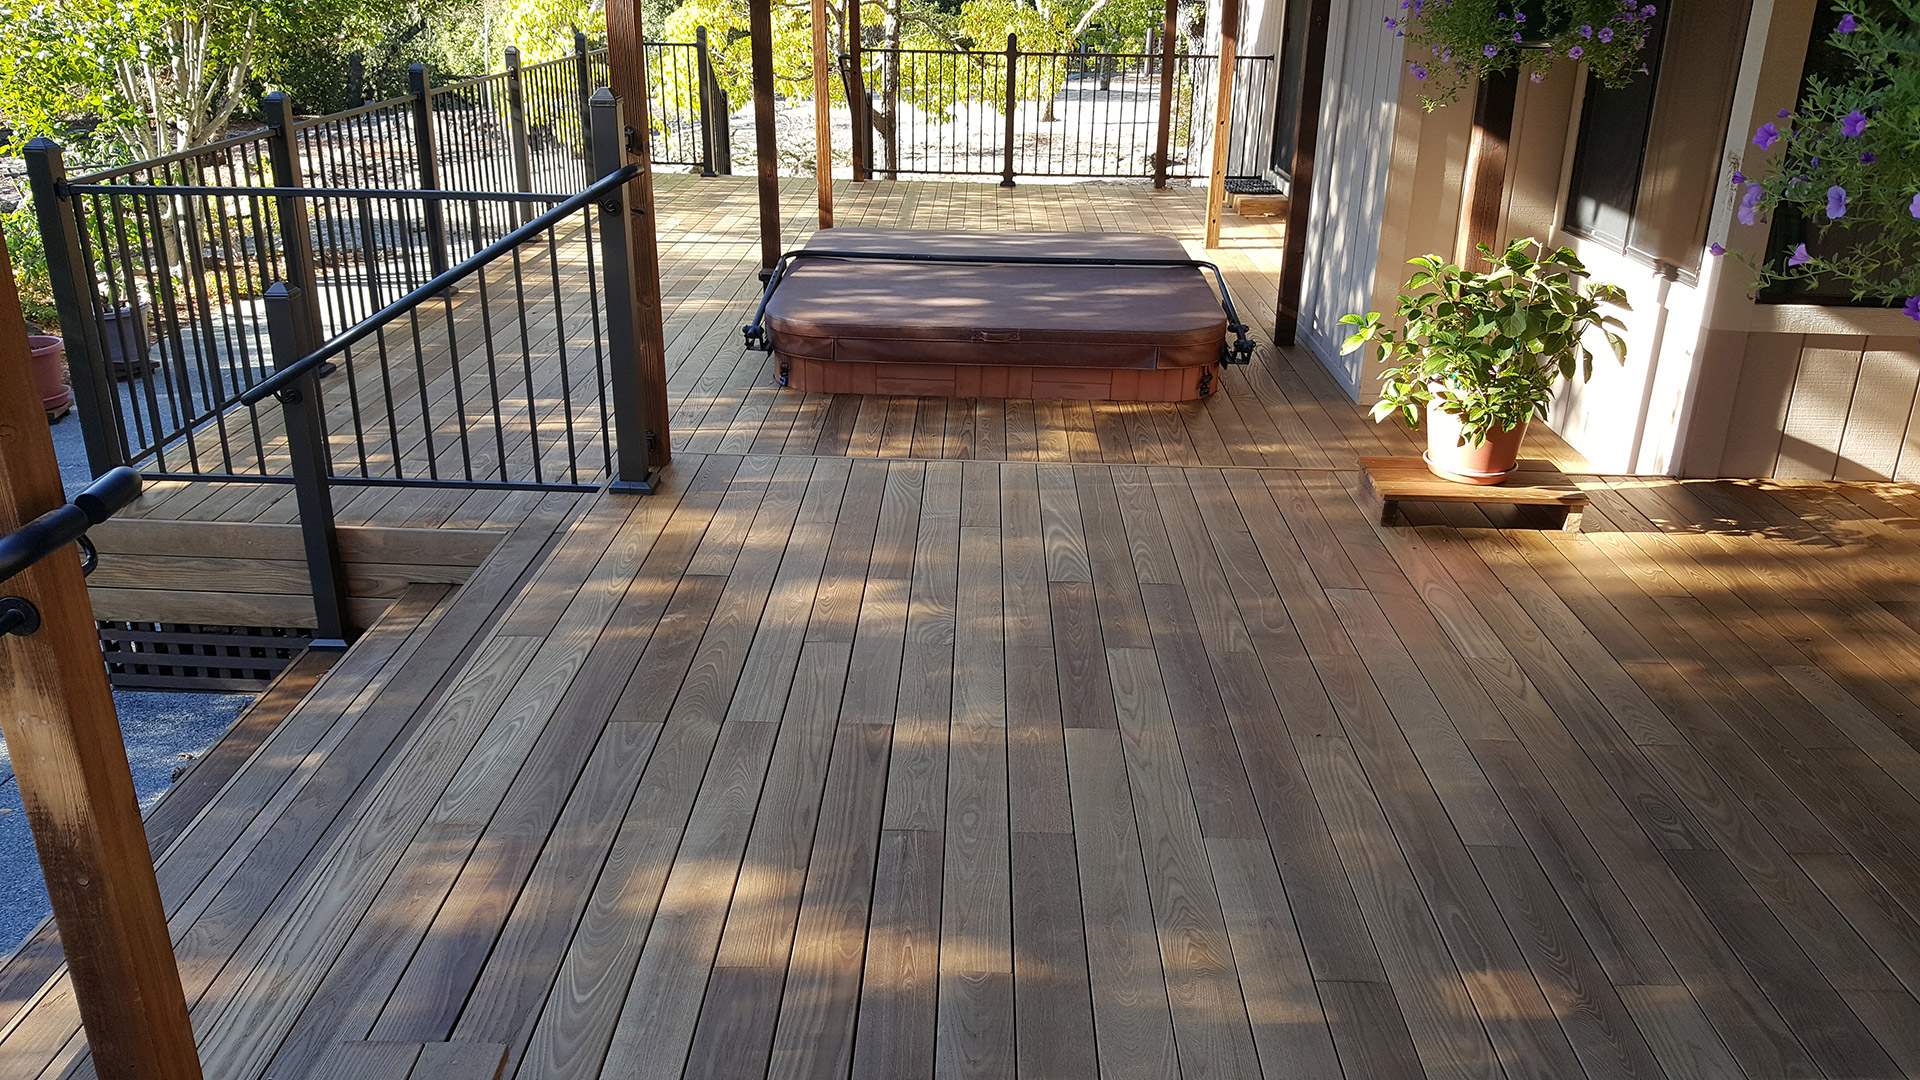 Thermally modified wood-Spa-Deck-Santa-Rosa-CA-by-Deckmaster | Deck ...